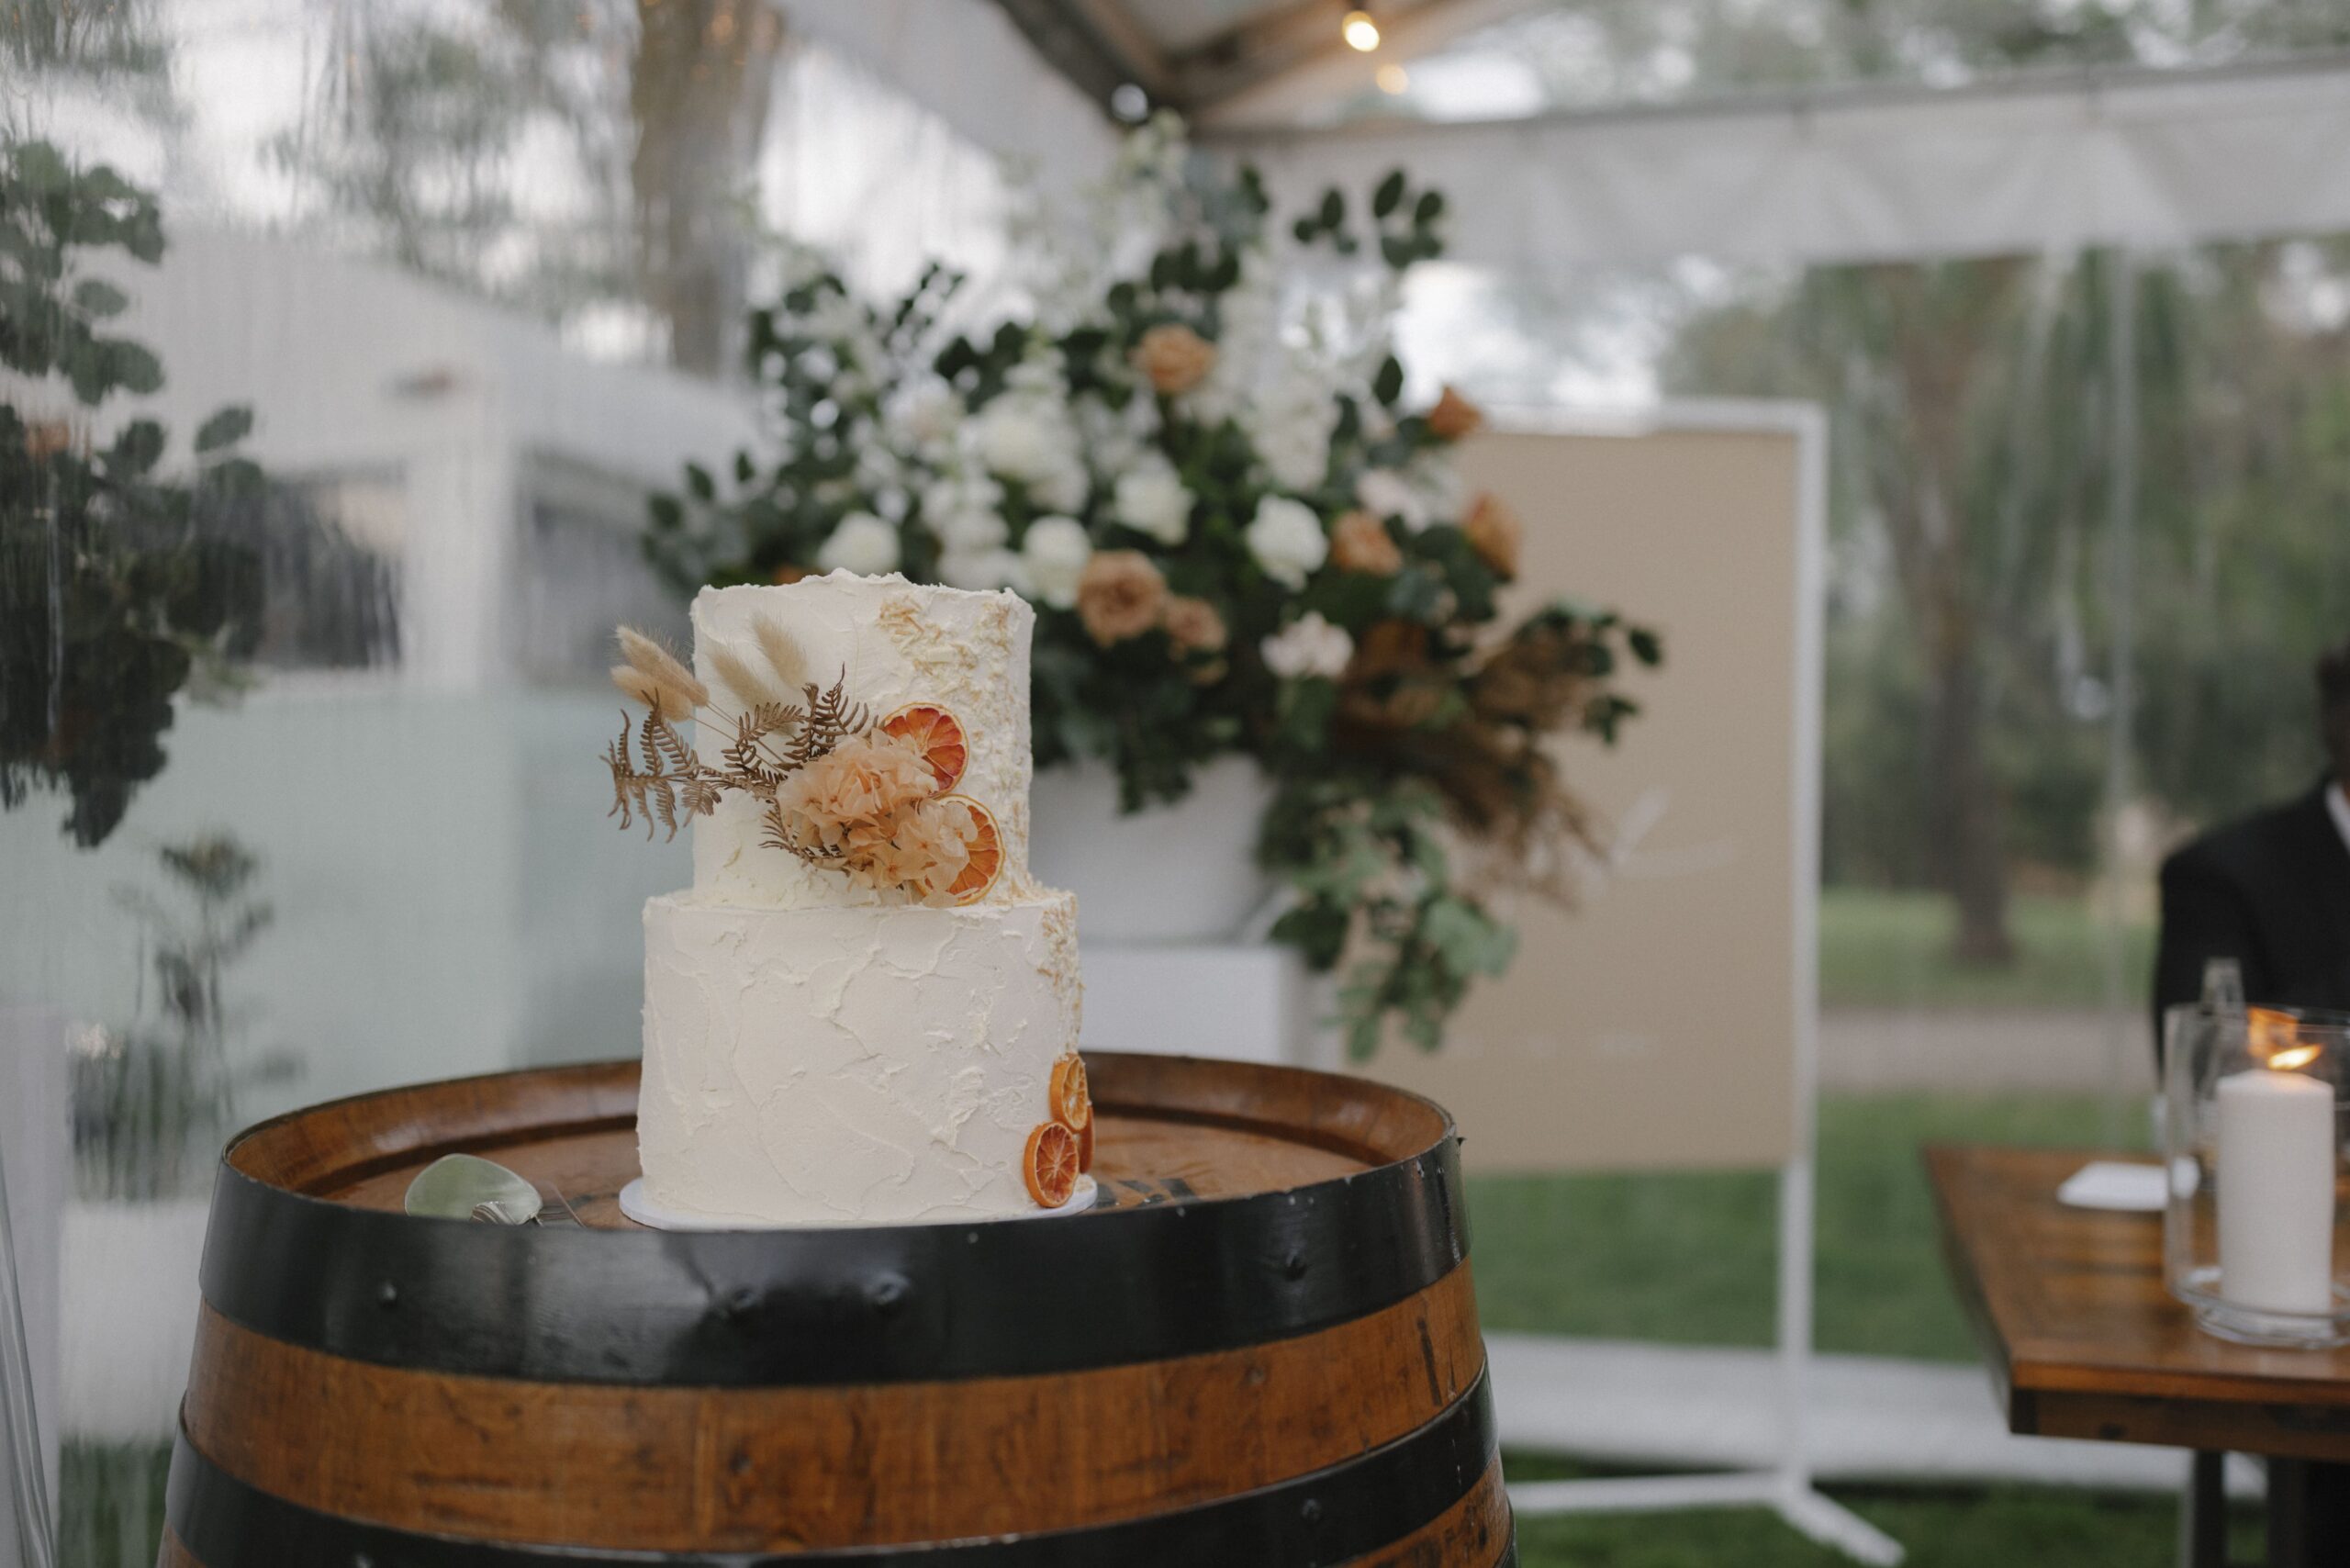 Floral cake sitting on a wine barrel with floral decor in the background